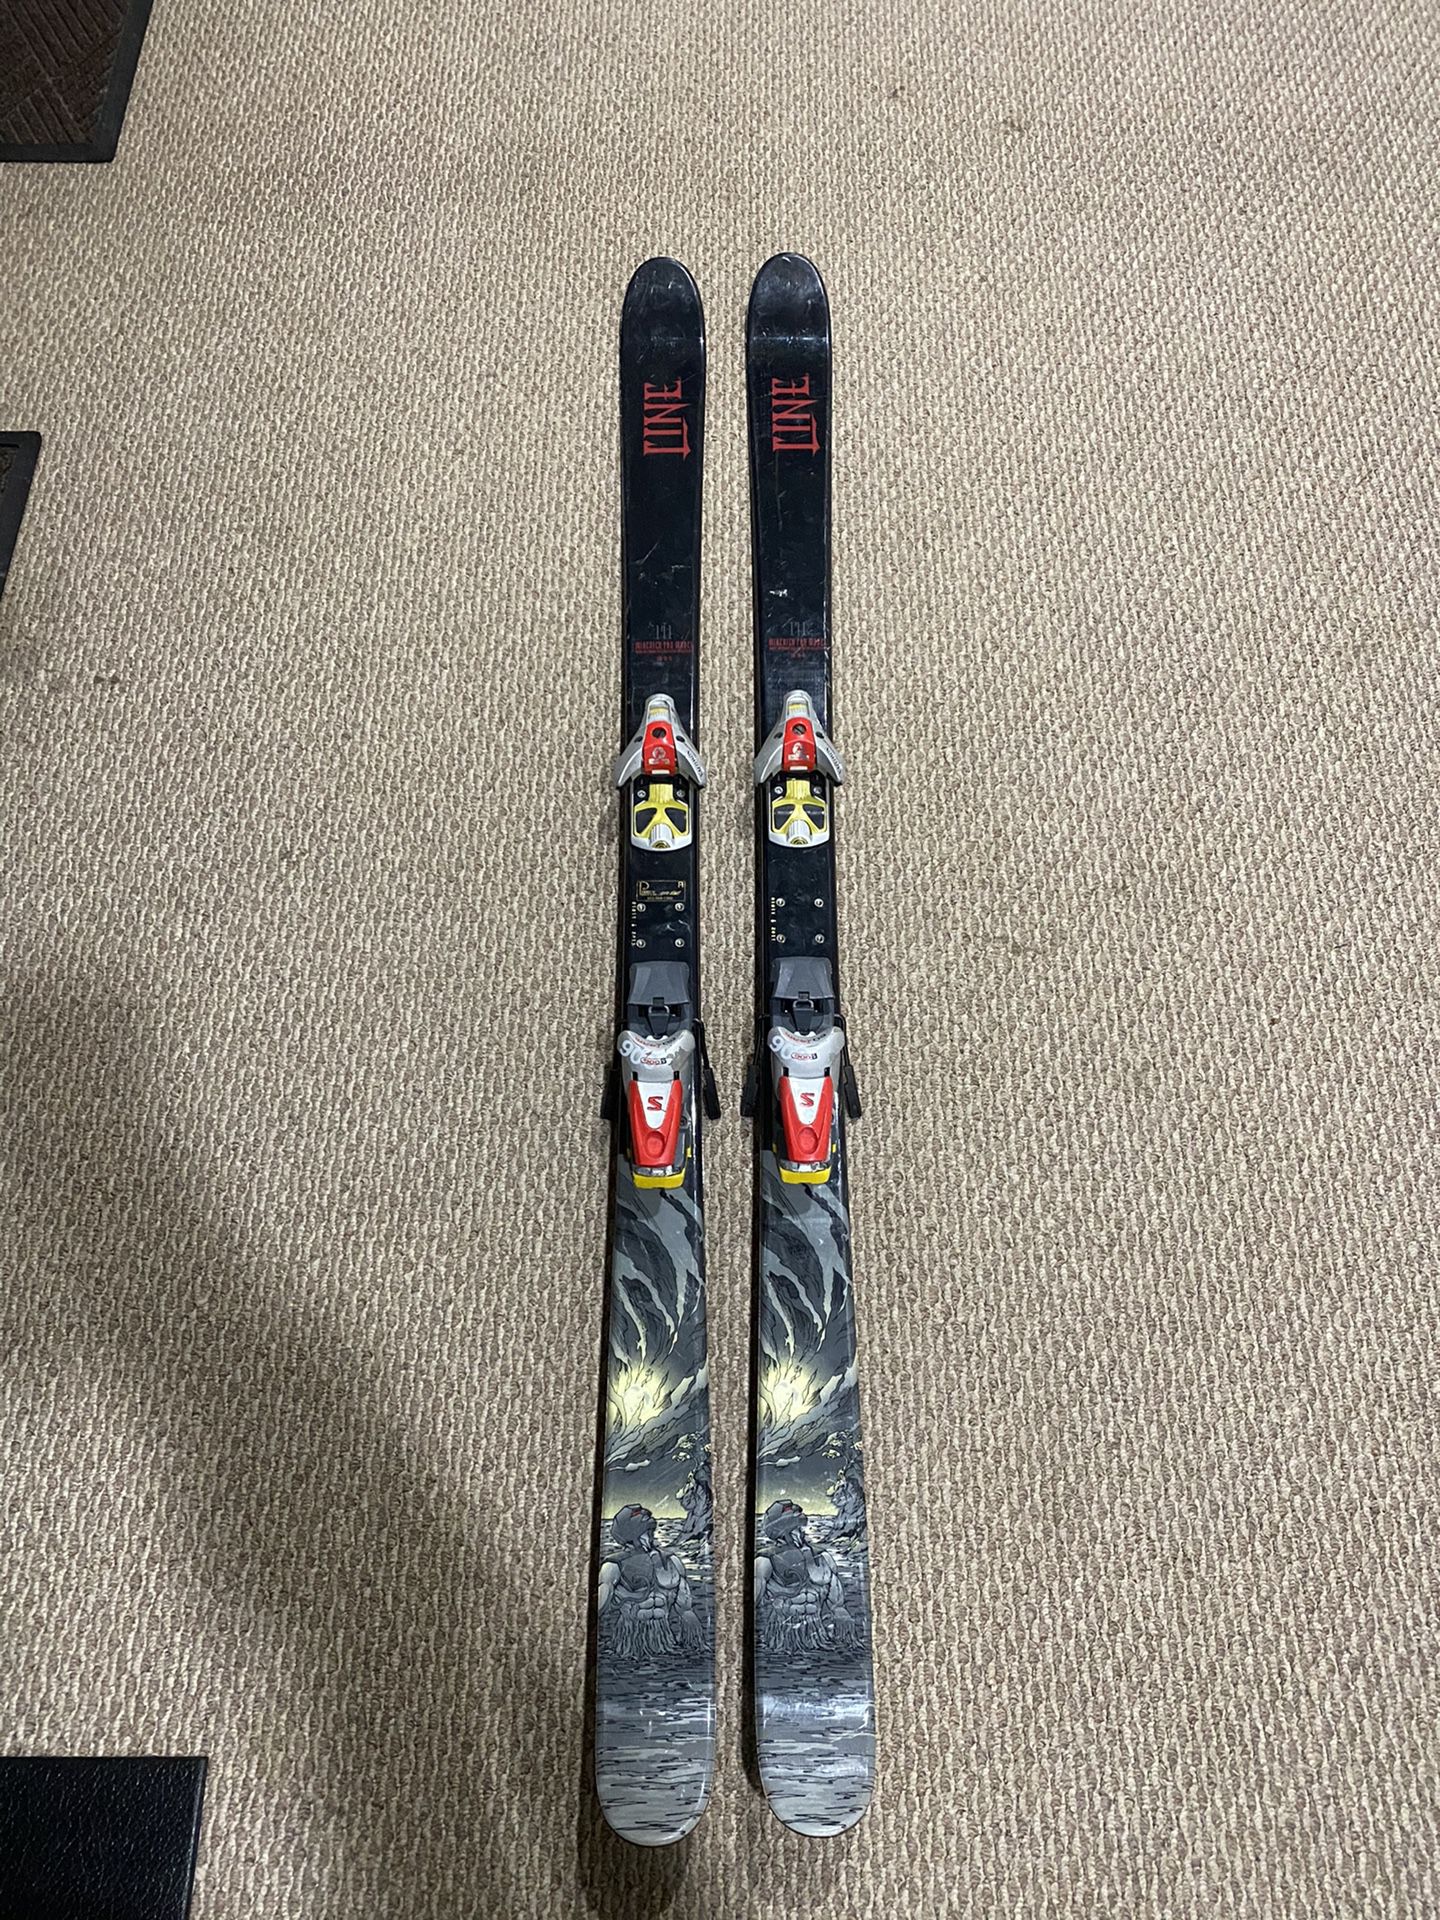 Line Mike Nick Pro Model Twin Tip X-Games Park Skis 171 Salomon Binding Skiboard with Boots